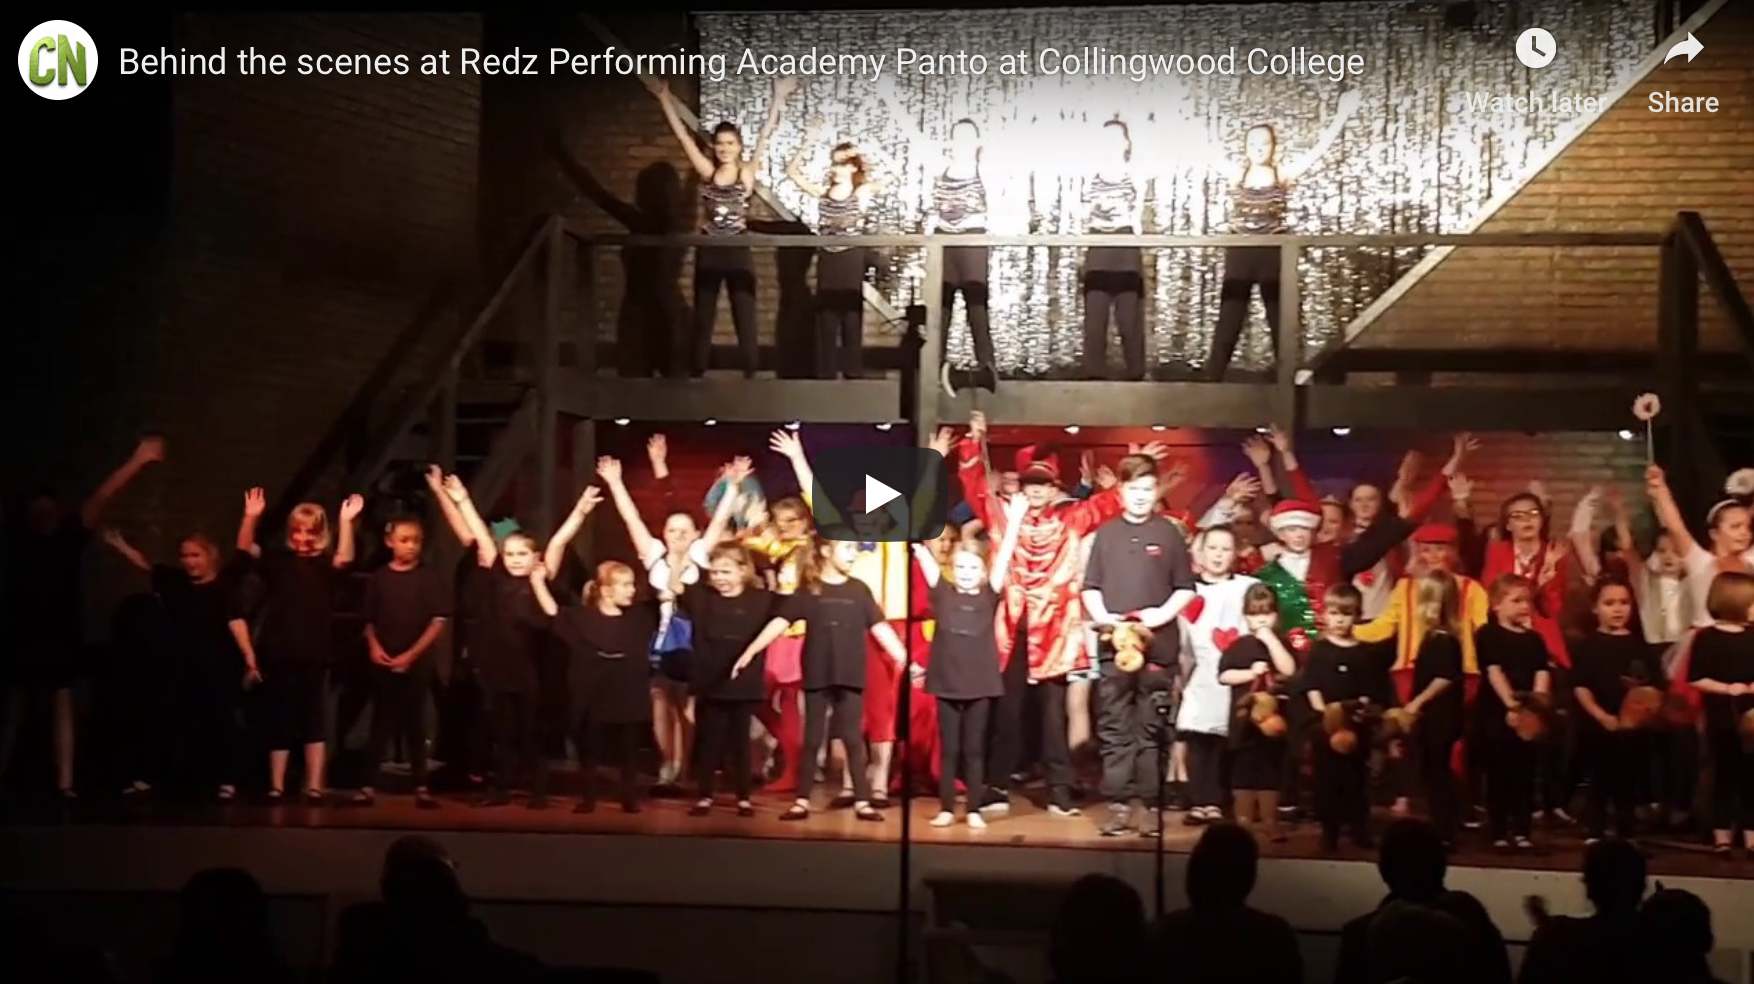 Behind the scenes at Redz Performing Academy Panto at Collingwood College